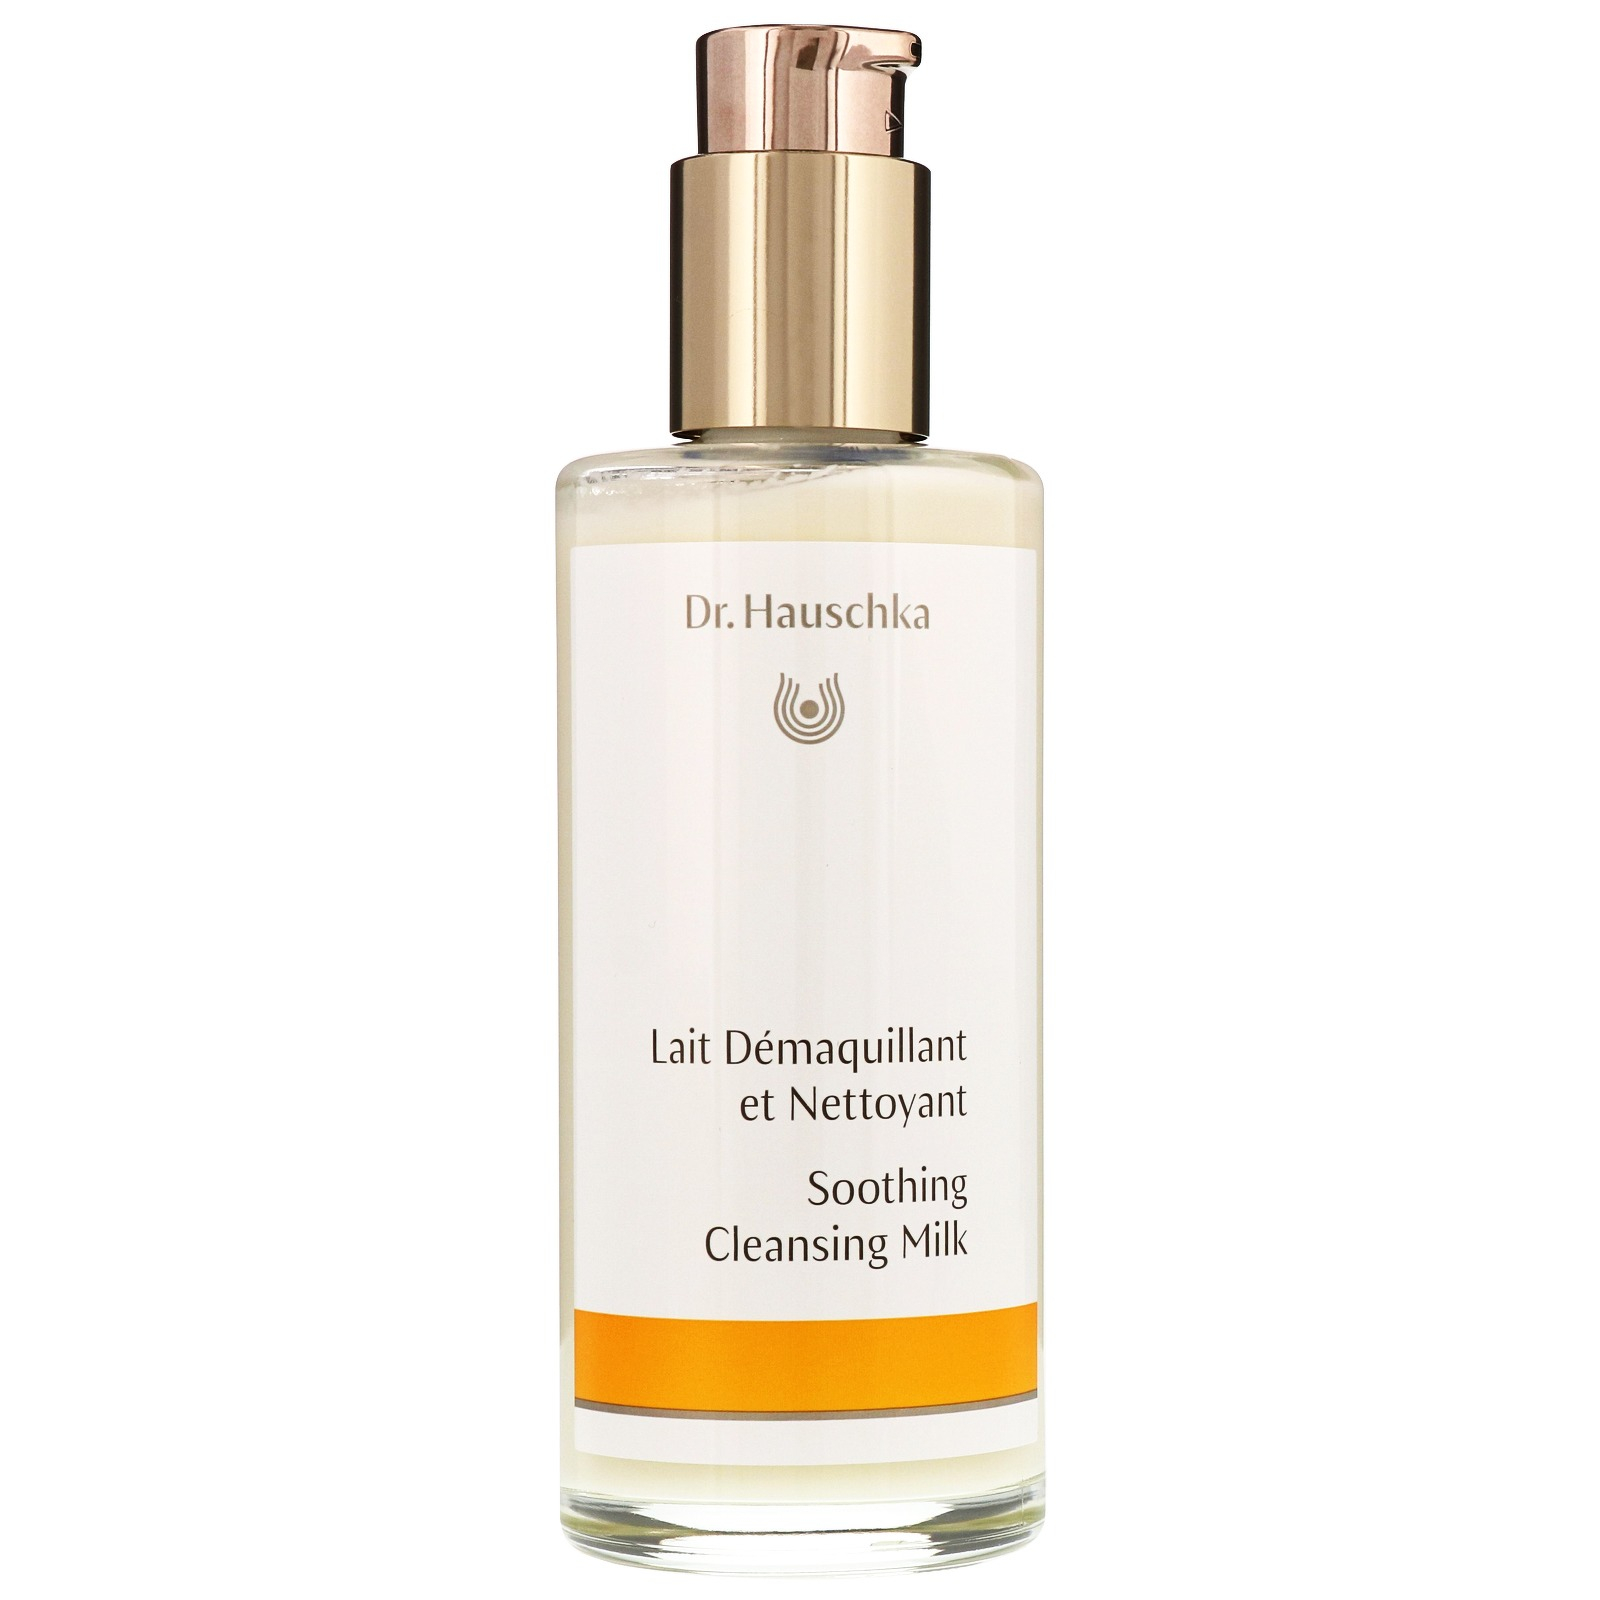 Dr Hauschka - Soothing Cleansing Milk (145ml)